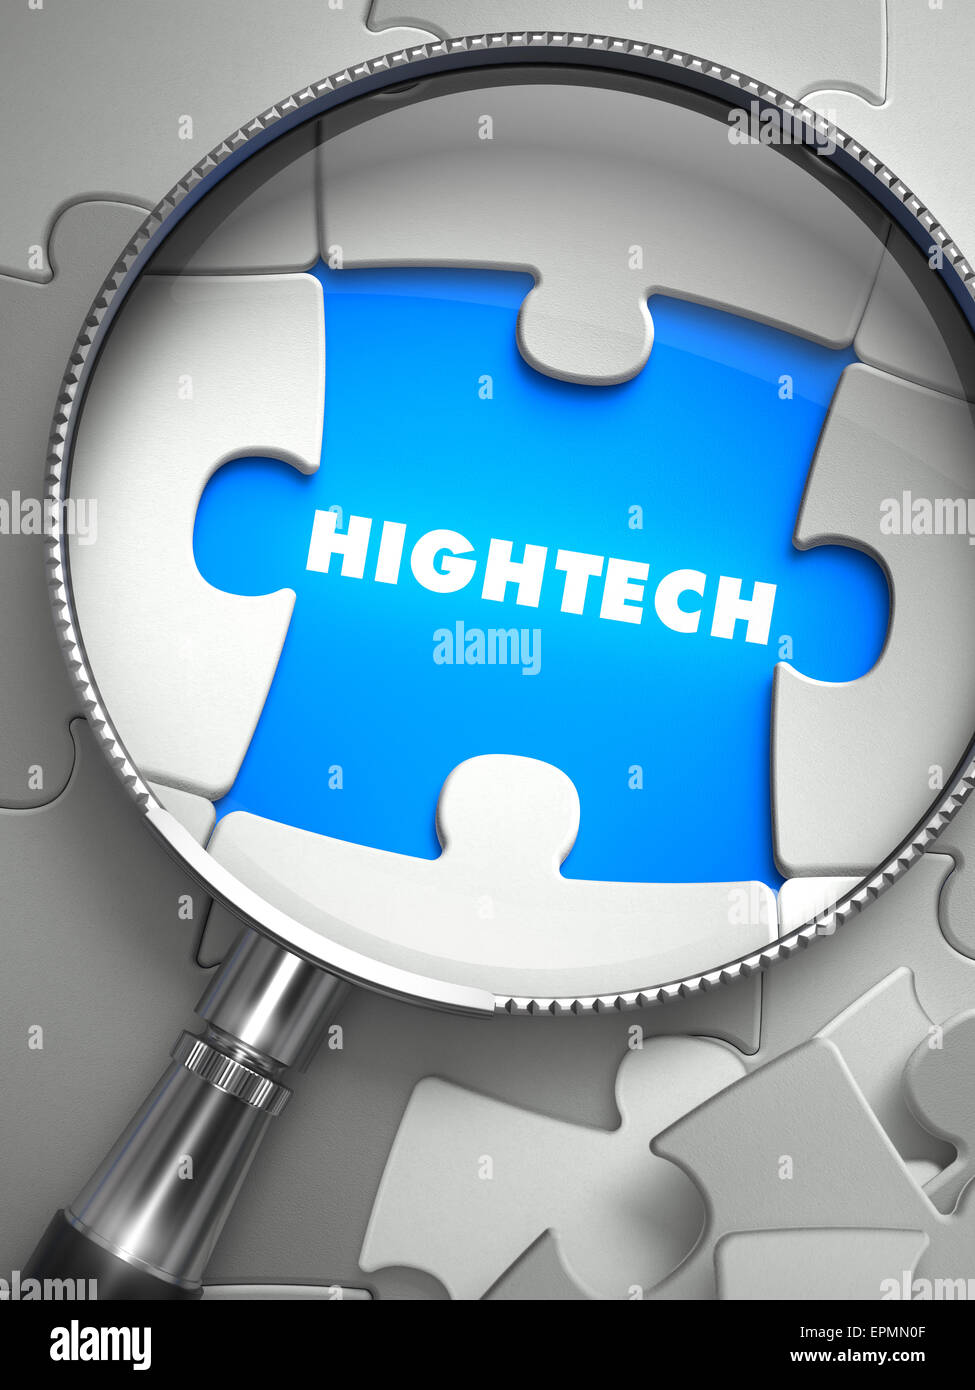 HighTech - Word on the Place of Missing Puzzle Piece through Magnifier. Selective Focus. Stock Photo